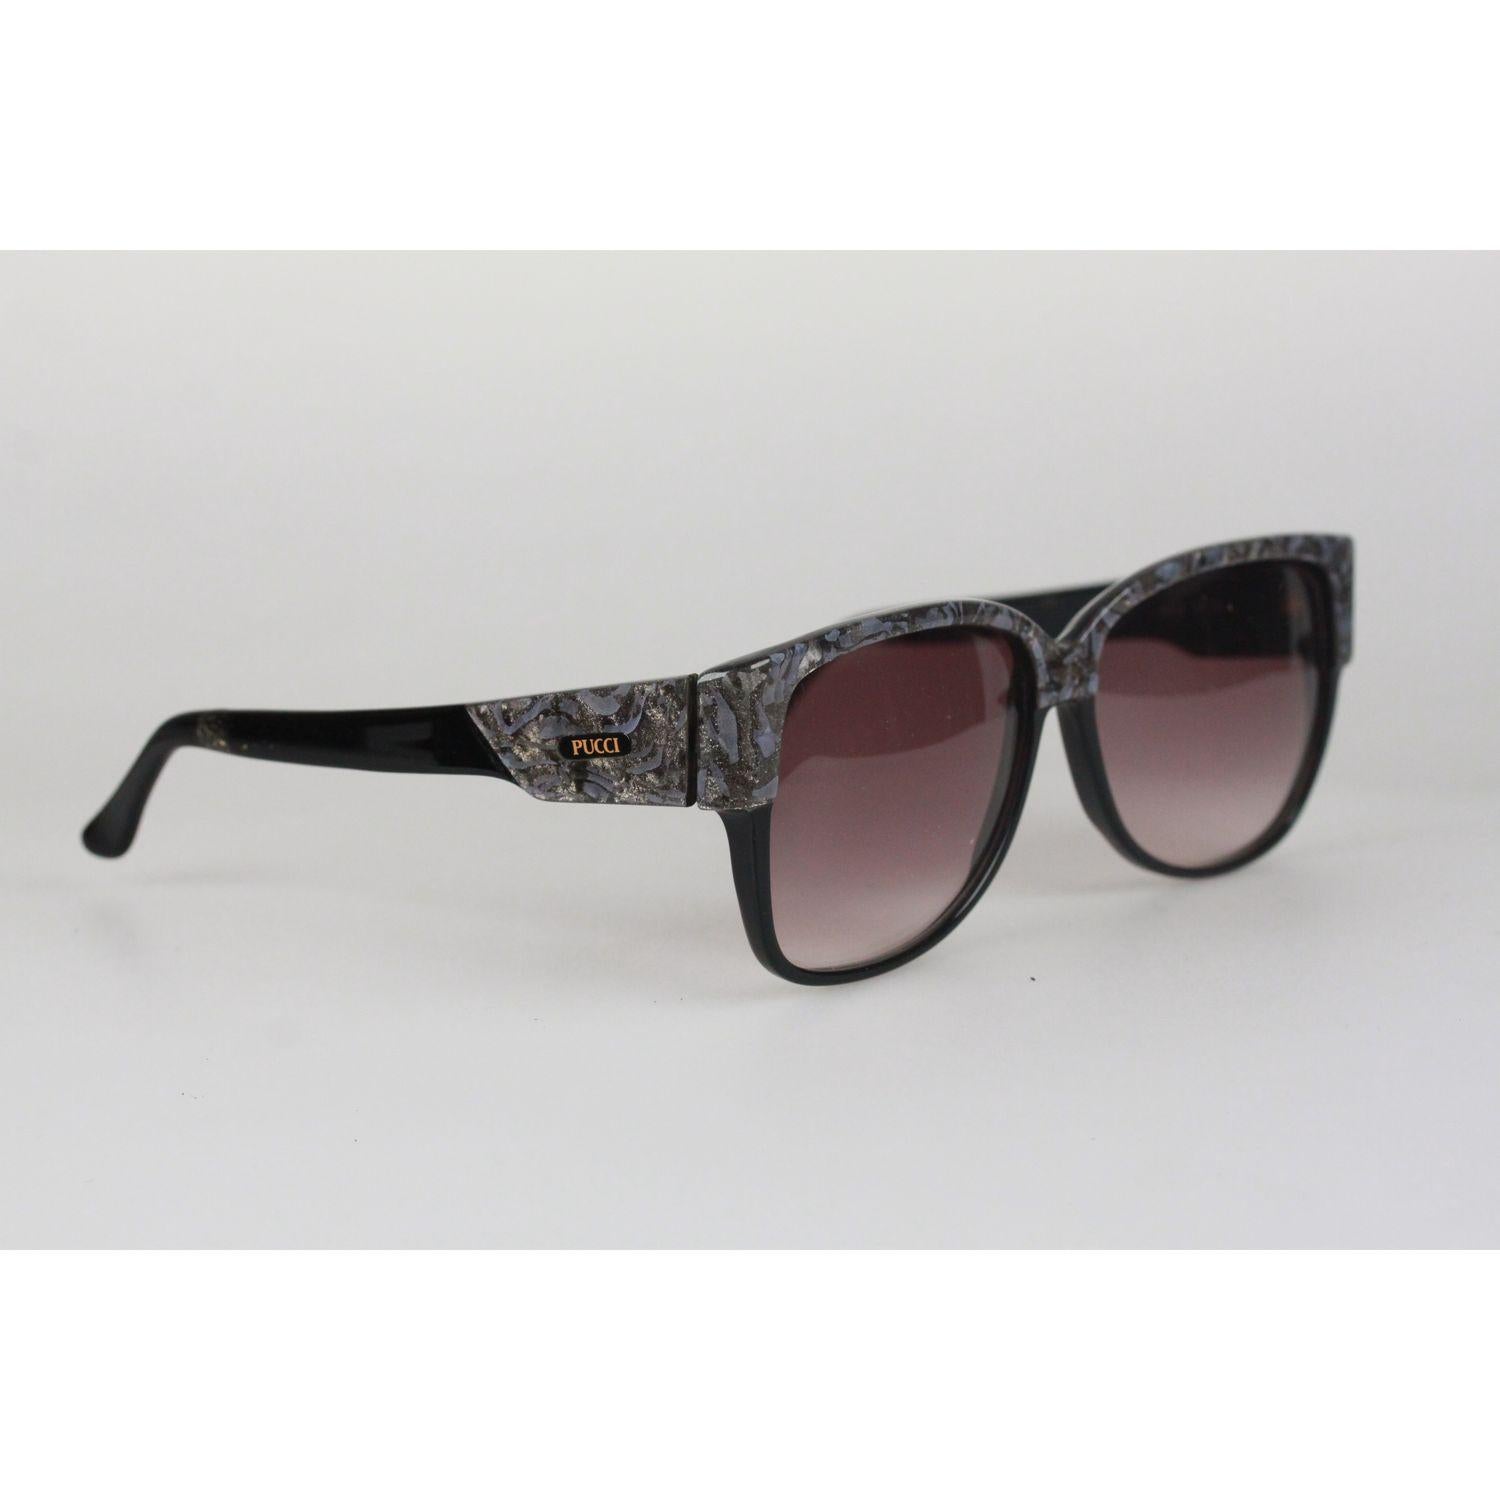 Emilio Pucci Vintage Black Sunglasses 88020 EP75 60mm New Old Stock For ...